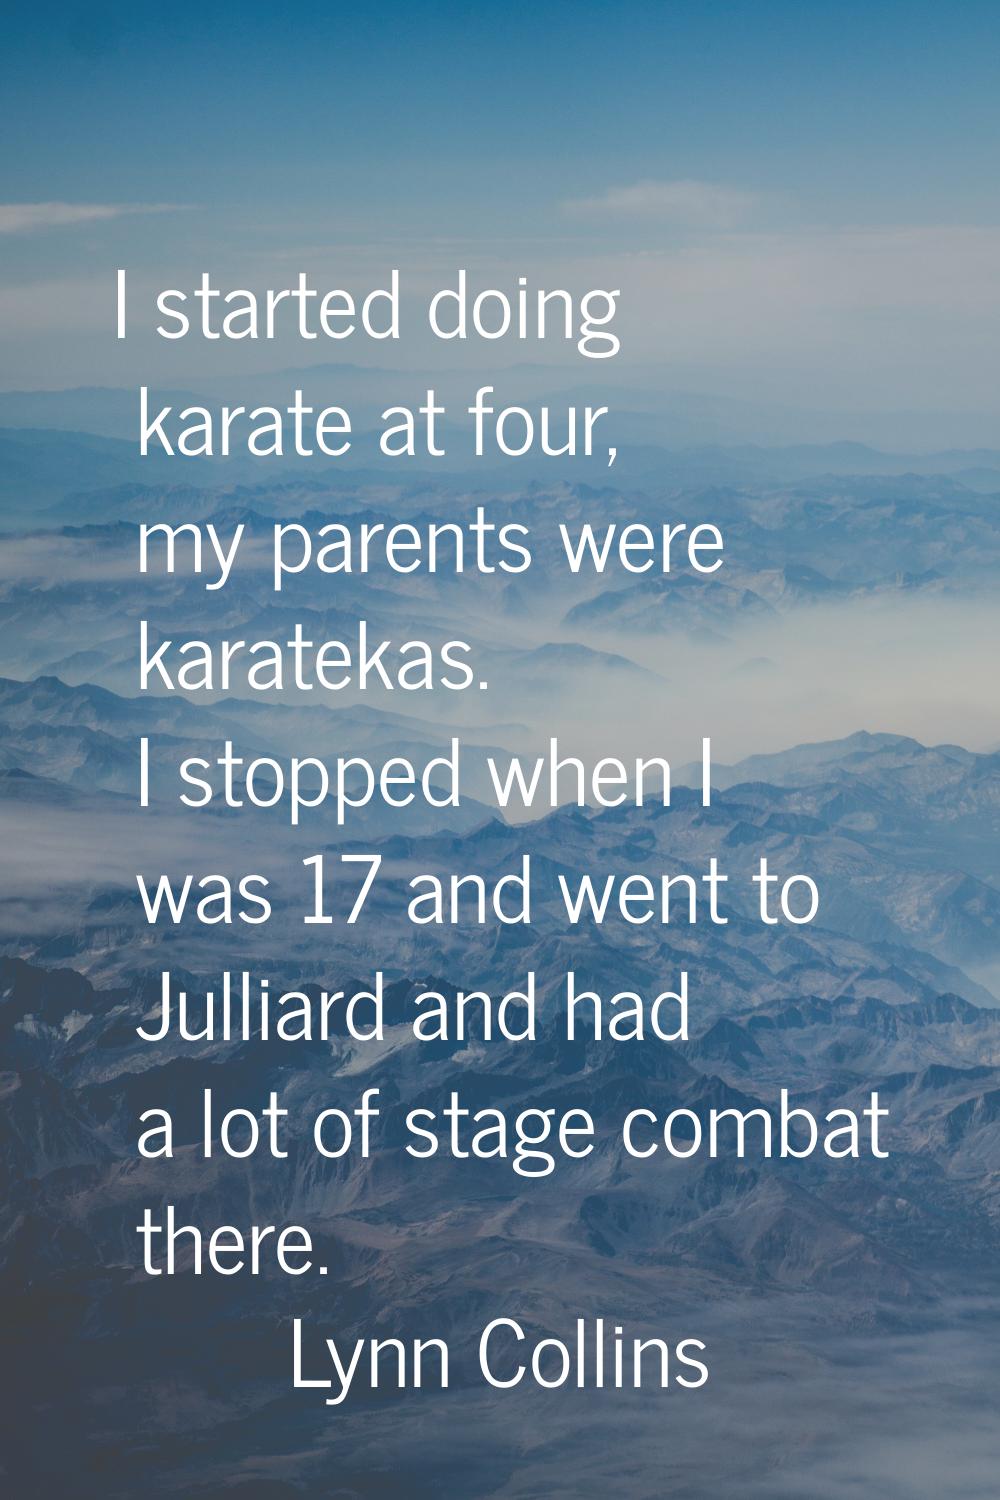 I started doing karate at four, my parents were karatekas. I stopped when I was 17 and went to Jull